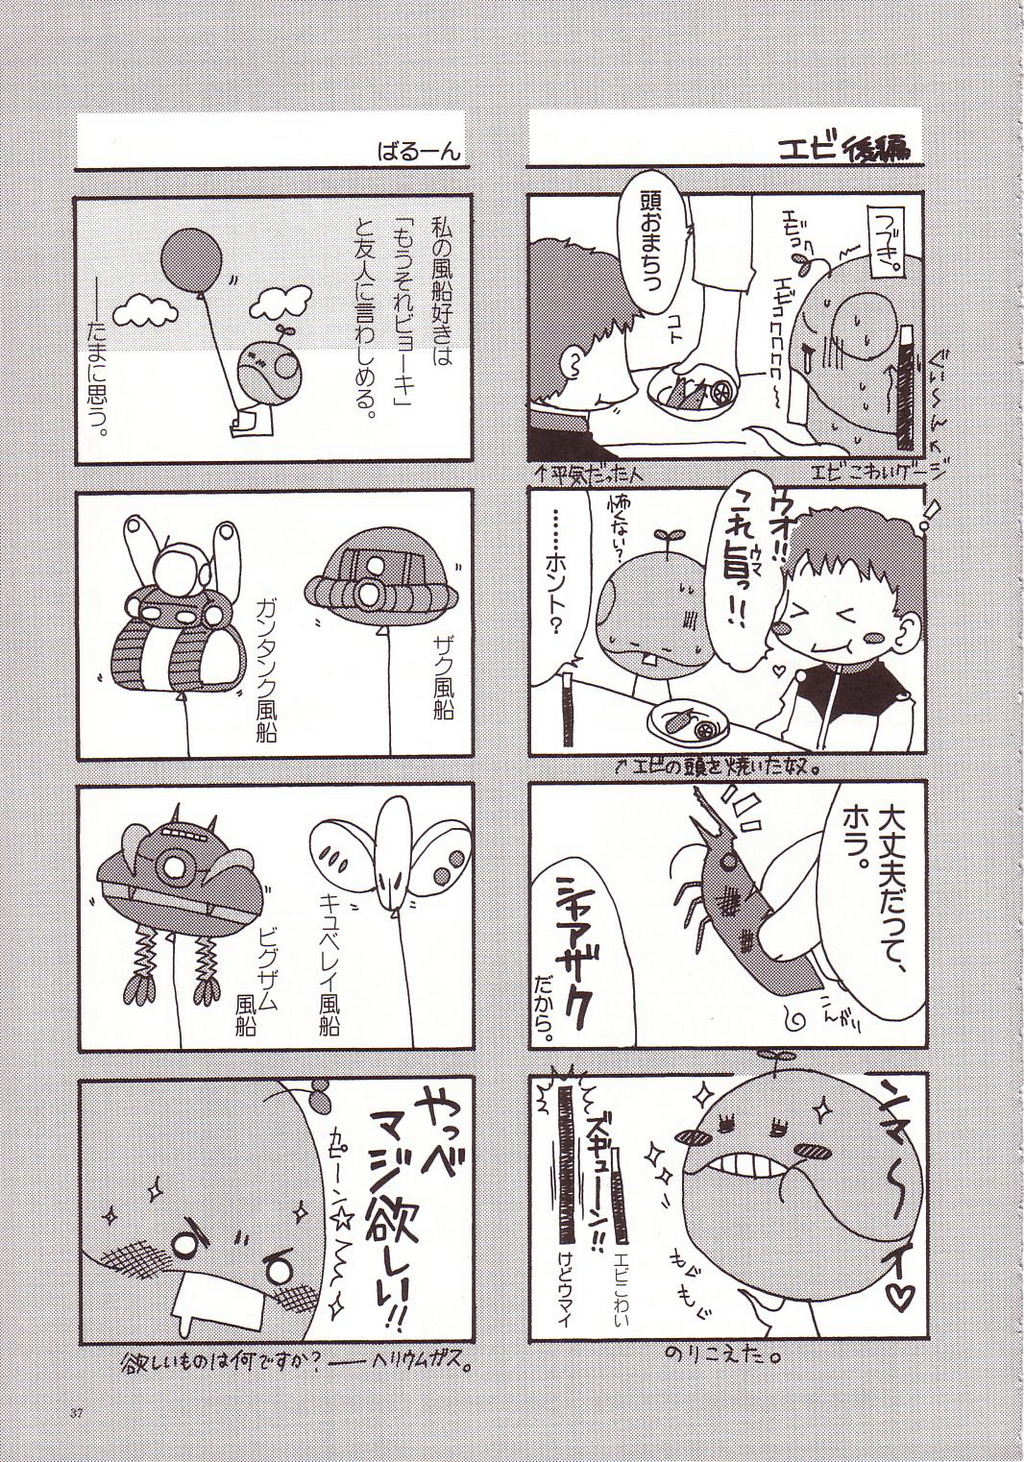 [AKABEi SOFT (Alpha)] Aishitai I WANT TO LOVE (Mobile Suit Gundam Char's Counterattack) page 36 full